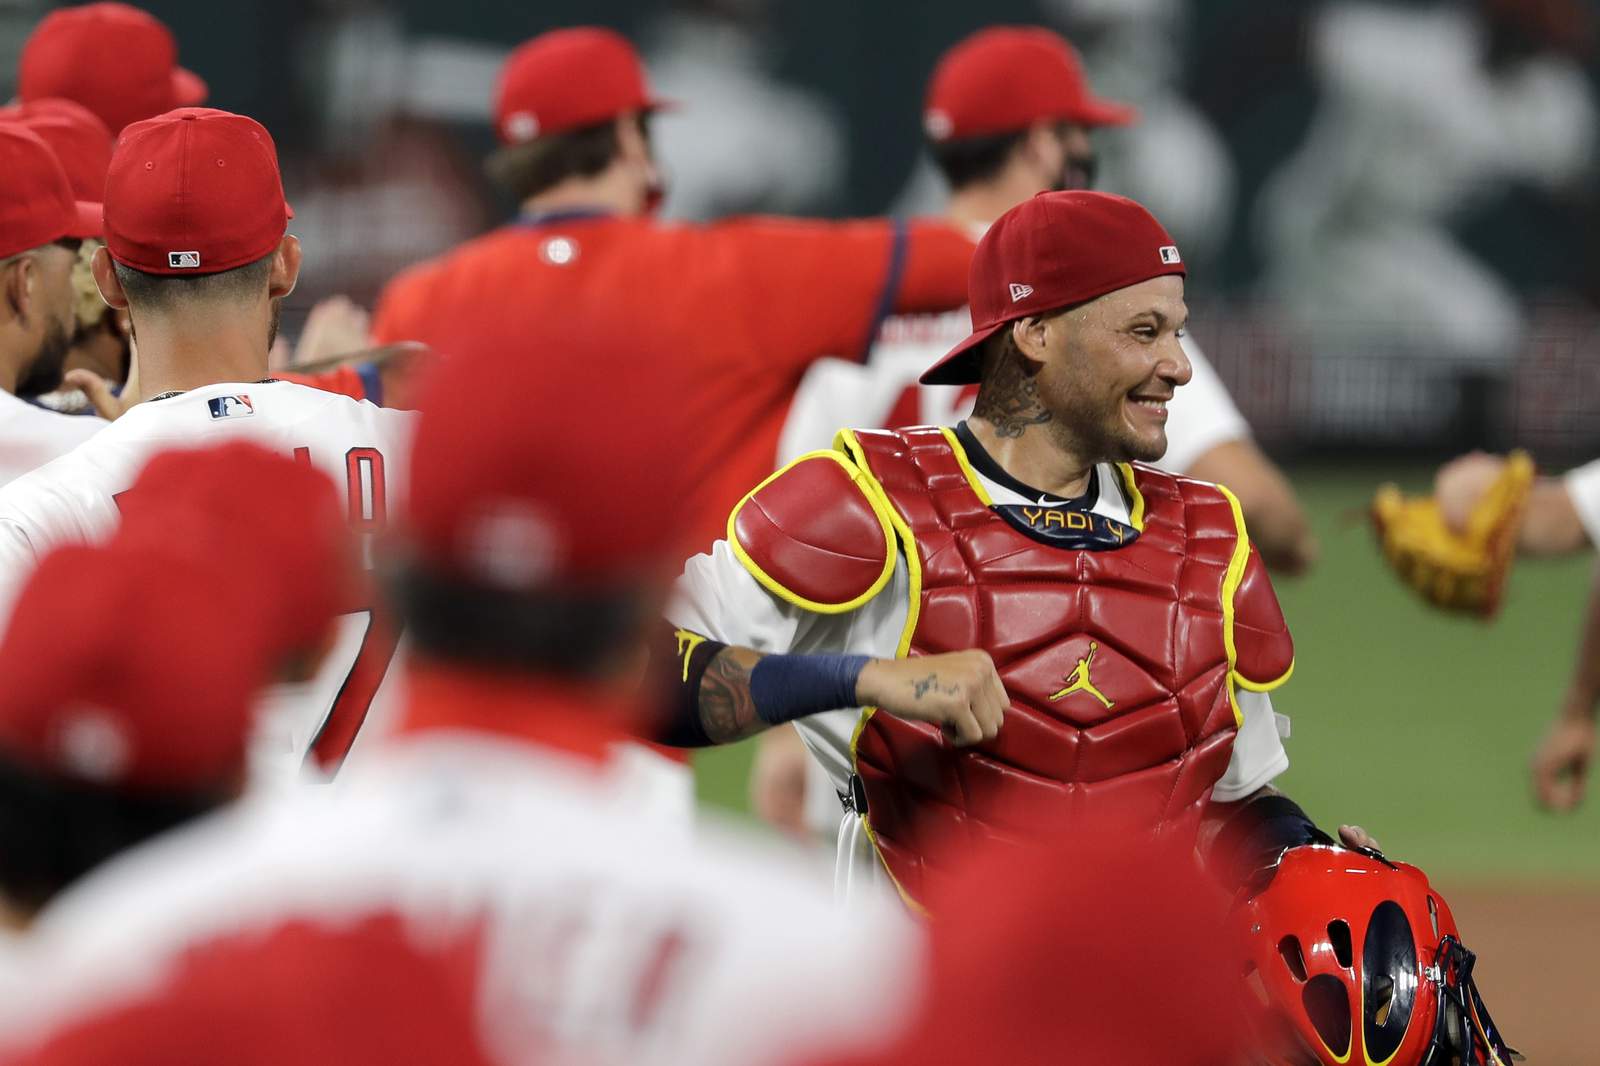 Cardinals return to St. Louis, get in workout ahead of games